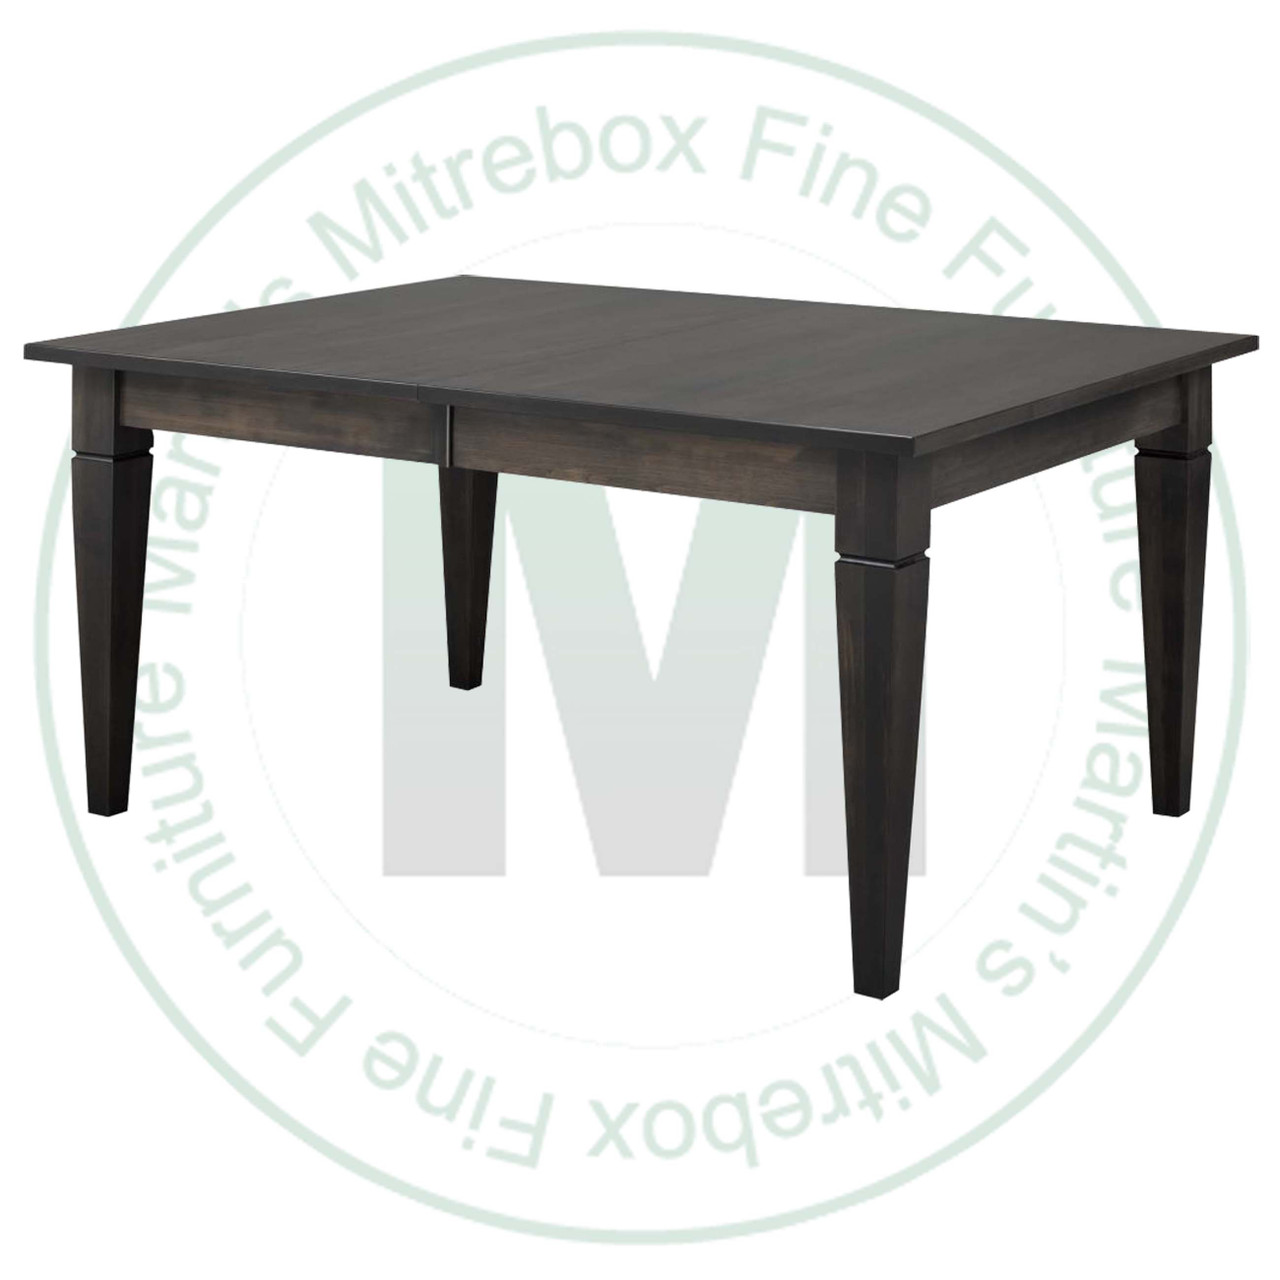 Wormy Maple Reesor Solid Top Harvest Table 36''D x 60''W x 30''H Table Has 1 3/4'' Thick Top And 2 - 16'' Extensions